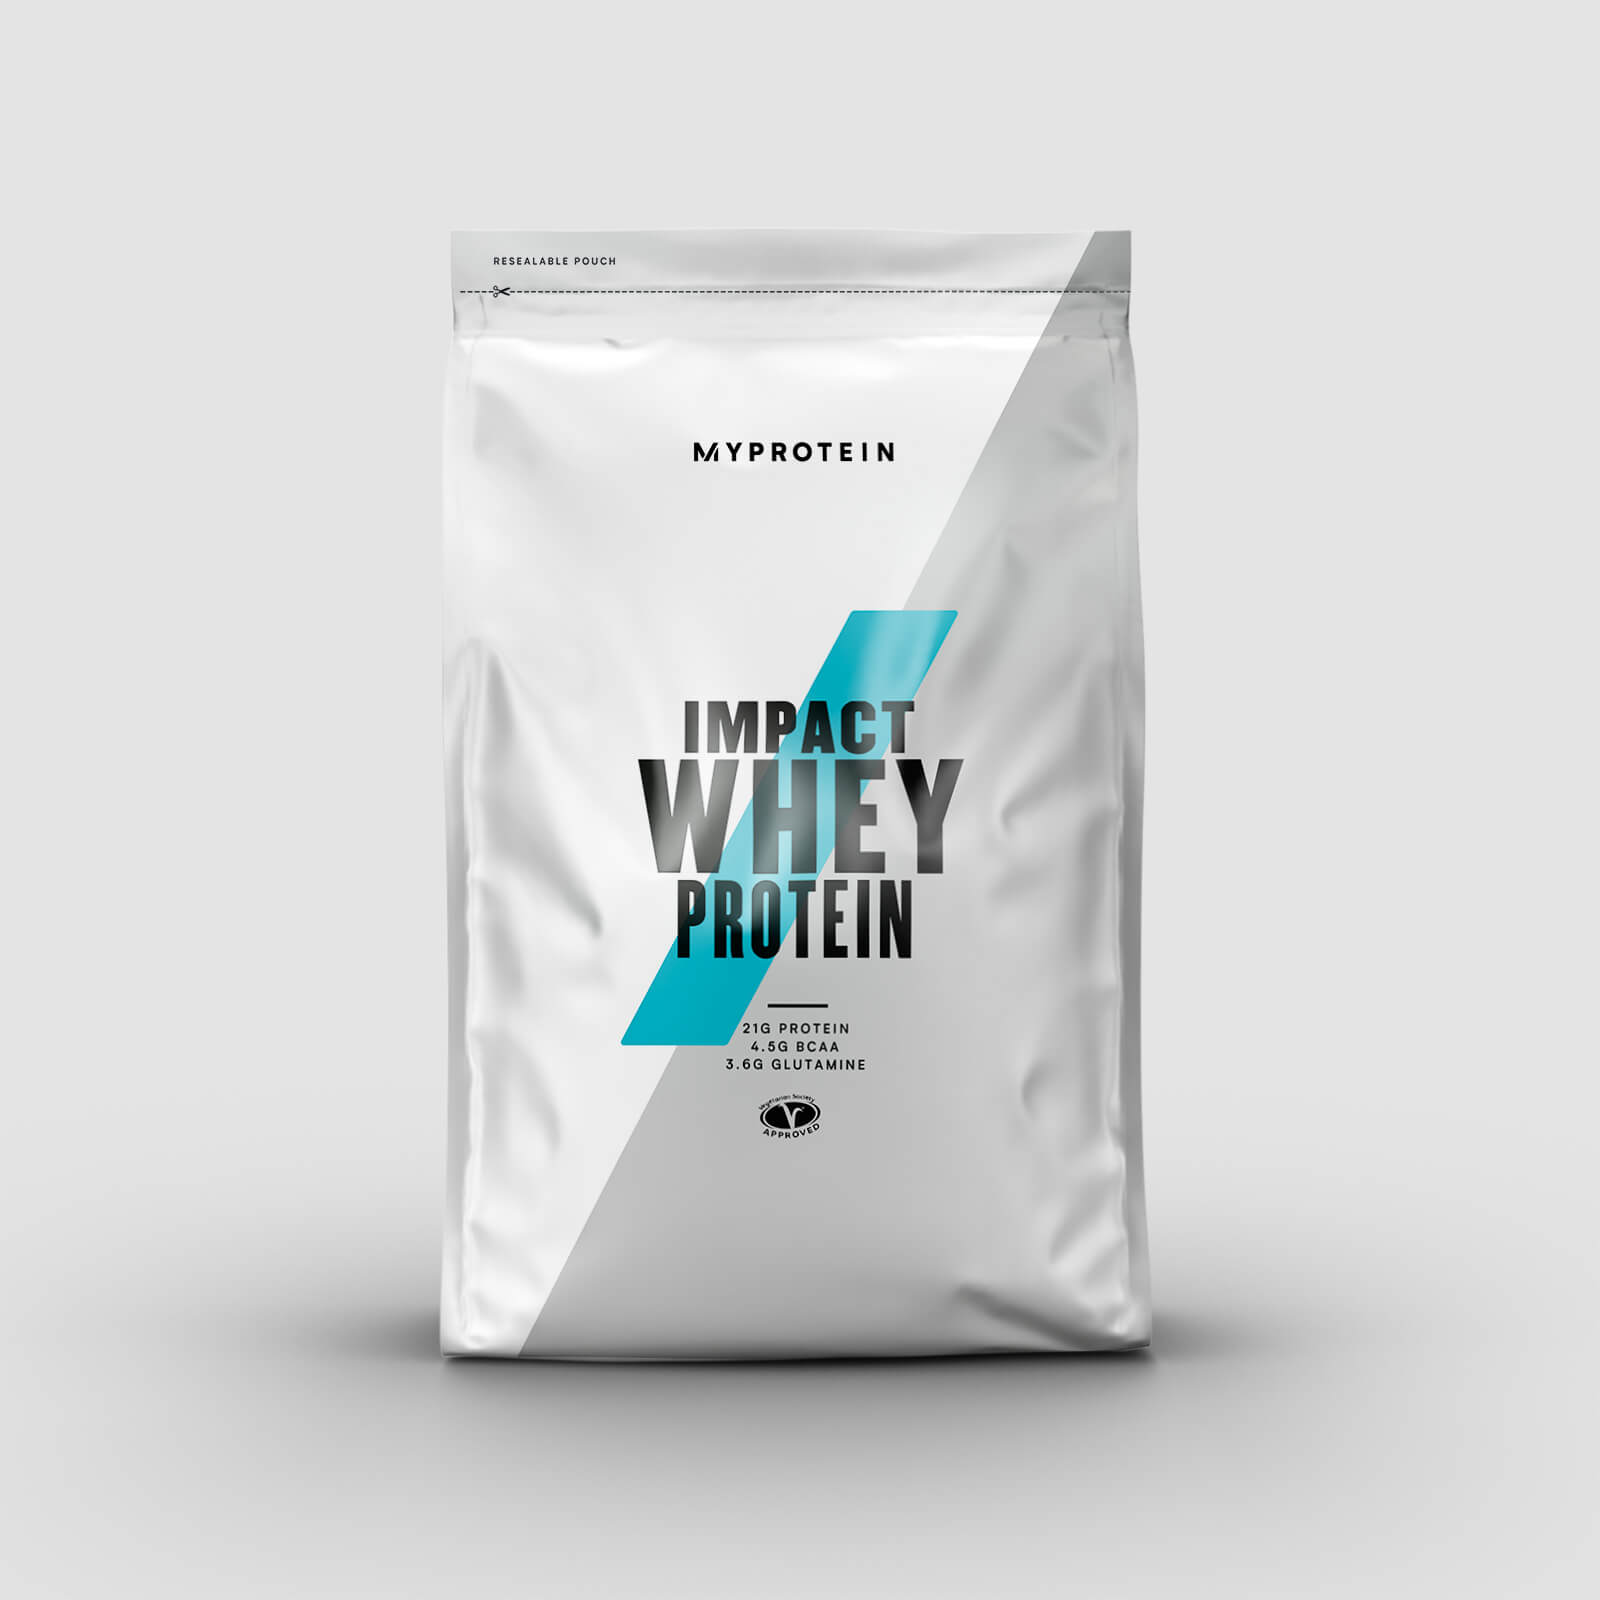 Myprotein Impact Whey Protein - 1kg - Raspberry - New and Improved